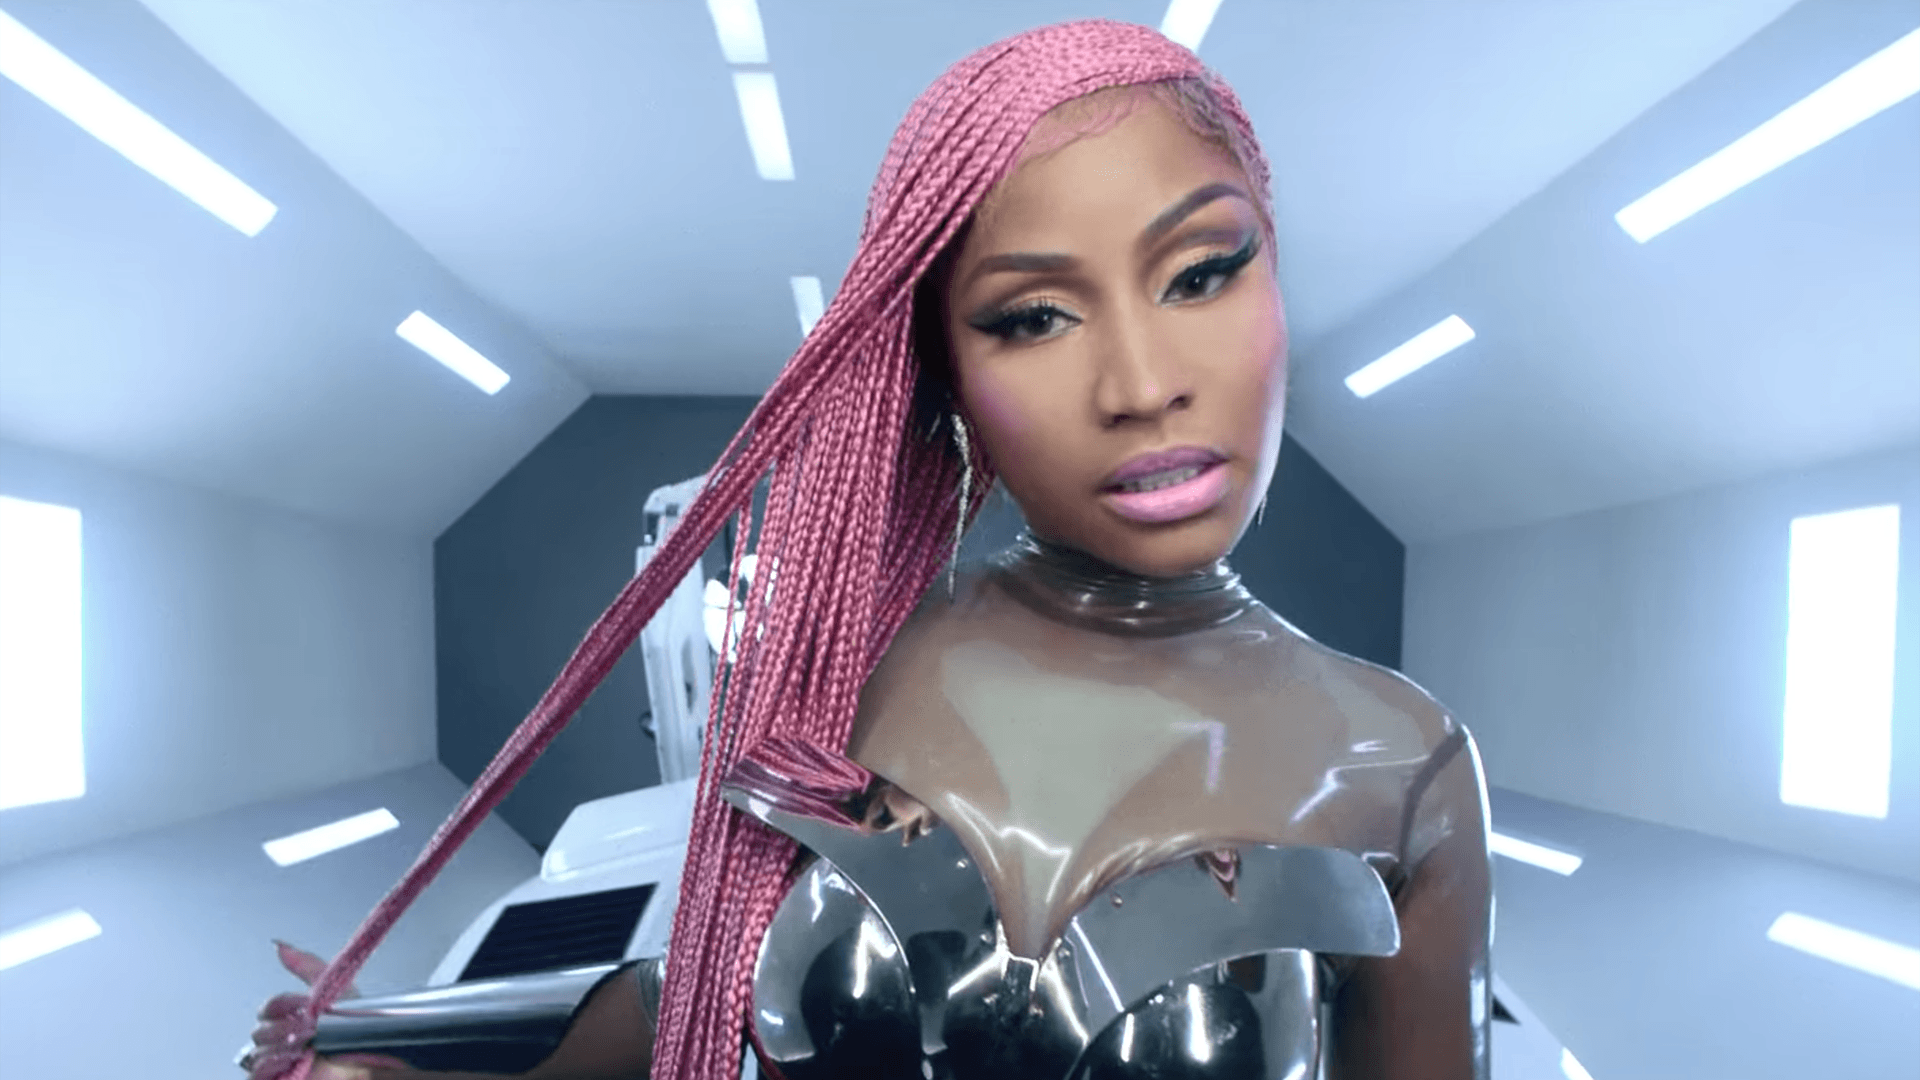 Nicki Minaj and Cardi B Are Futuristic Car Enthusiasts in a New Music Video for MotorSport with Migos